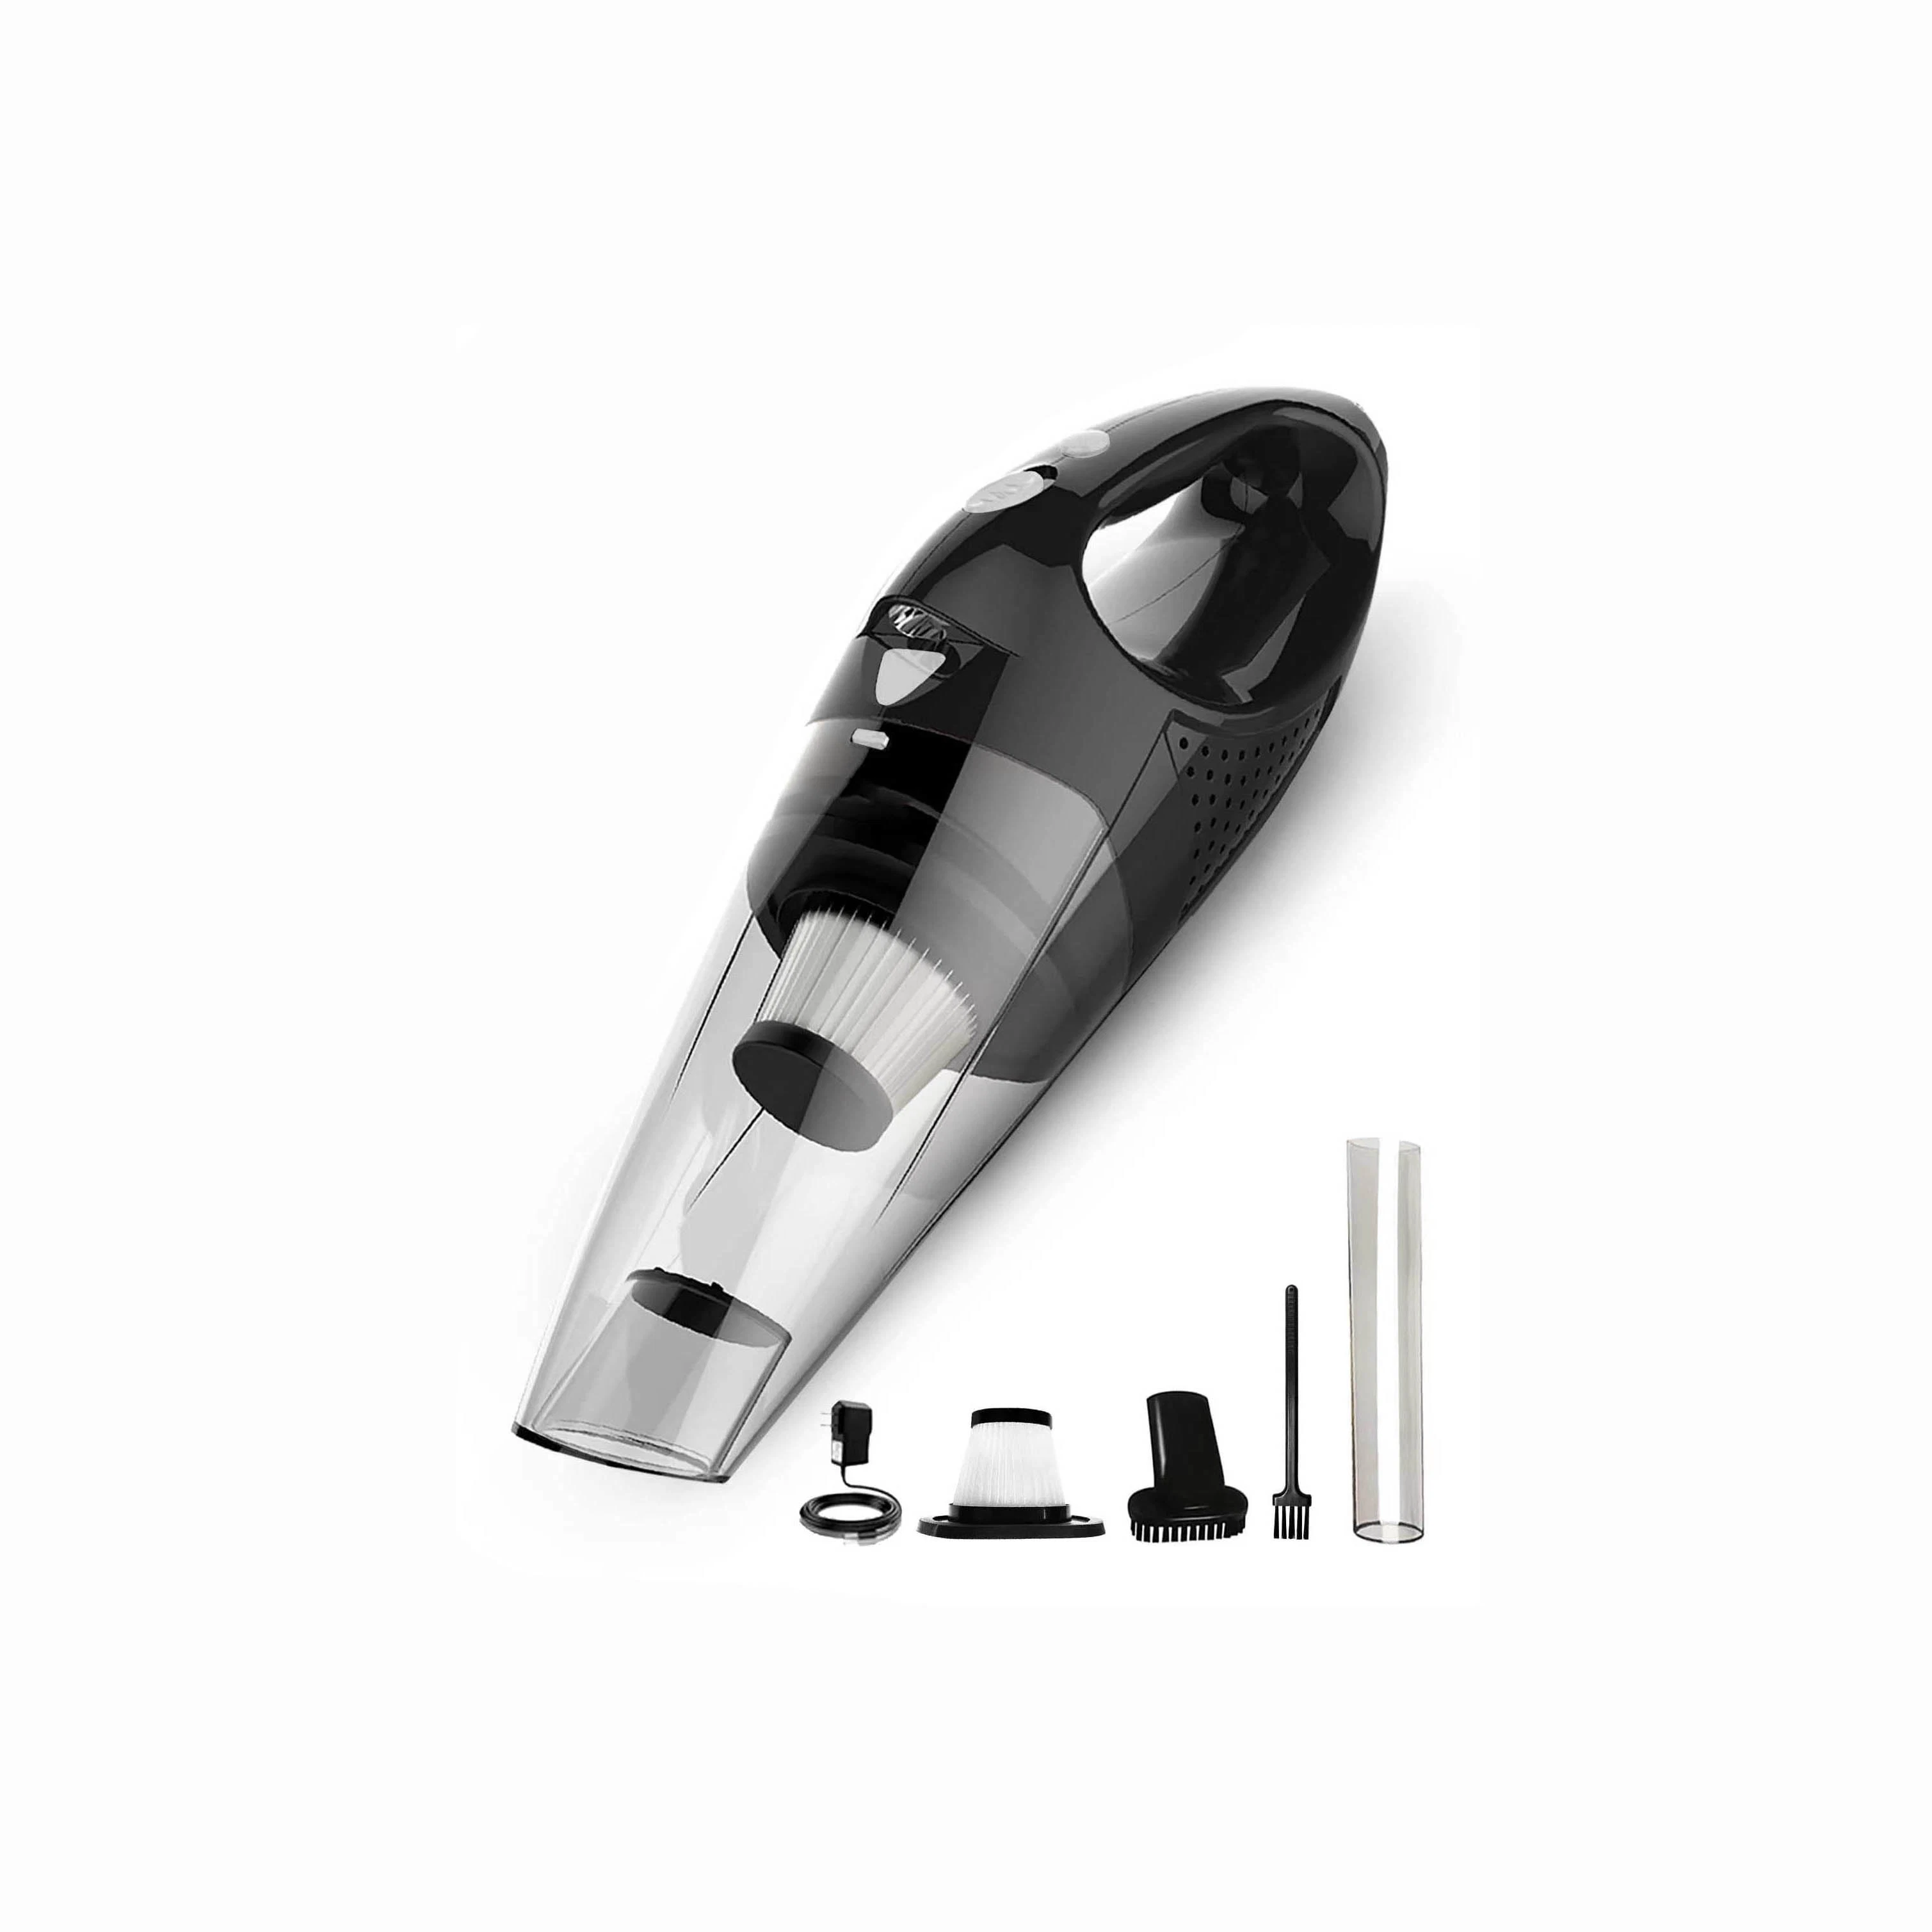 Handheld Car Vacuum Cleaner Wireless Portable Suction ABS Automatic 12V 120W CE RoHS DC12V Plus Air Blower Interior Cleaning Kit